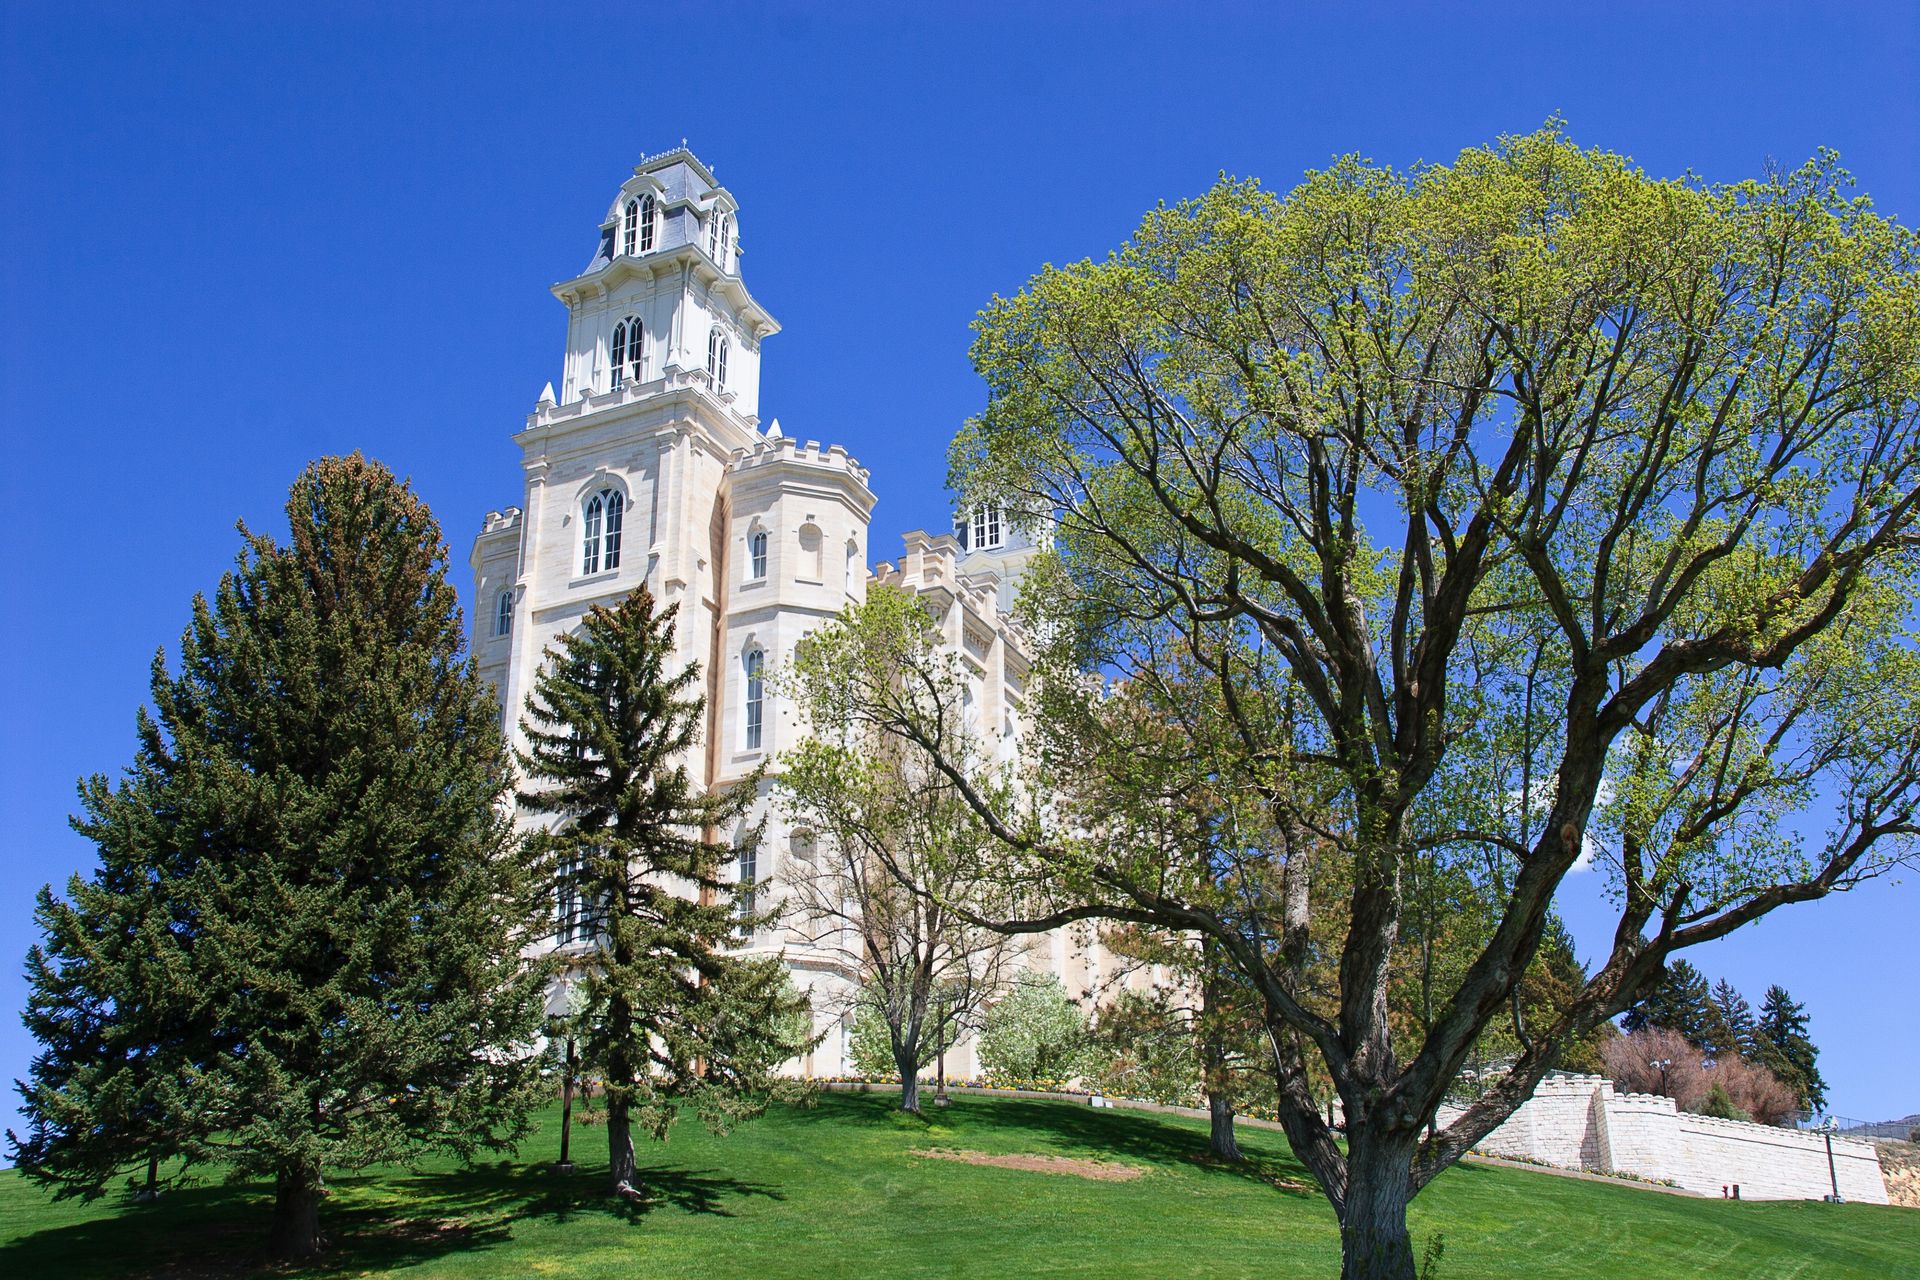 The Manti Utah Temple exterior, including the spire and scenery.  